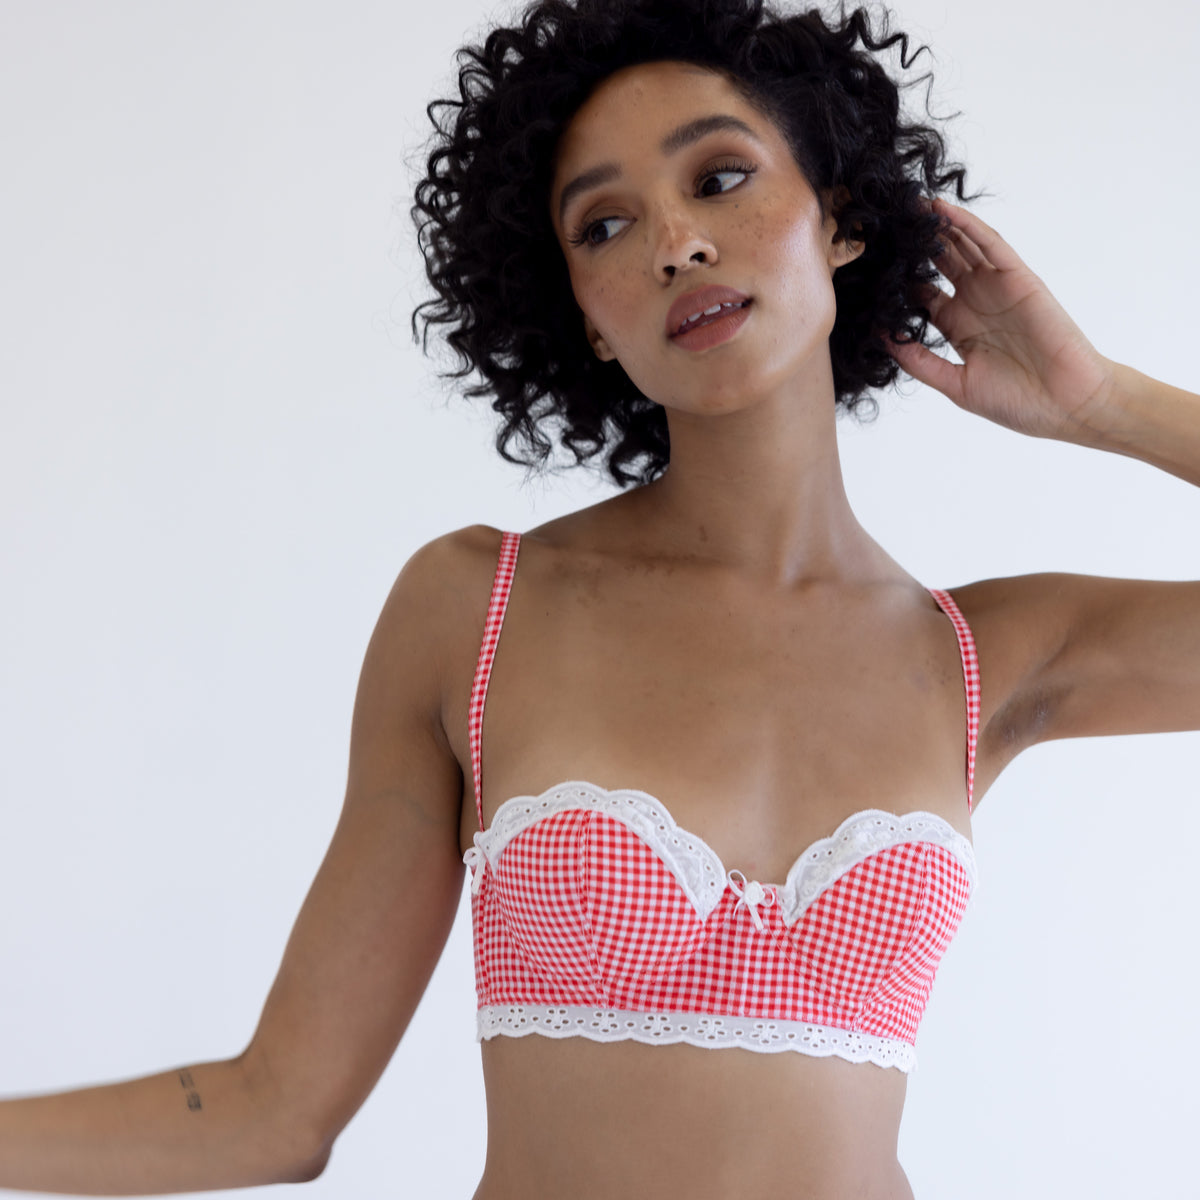 Red Ribbon - 🌟 🌟 🌟 🌟 🌟 5 star review from Cathi Richel: Super pretty  Love this bra! Simple yet pretty. Fits true to size. I havevit in white as  well